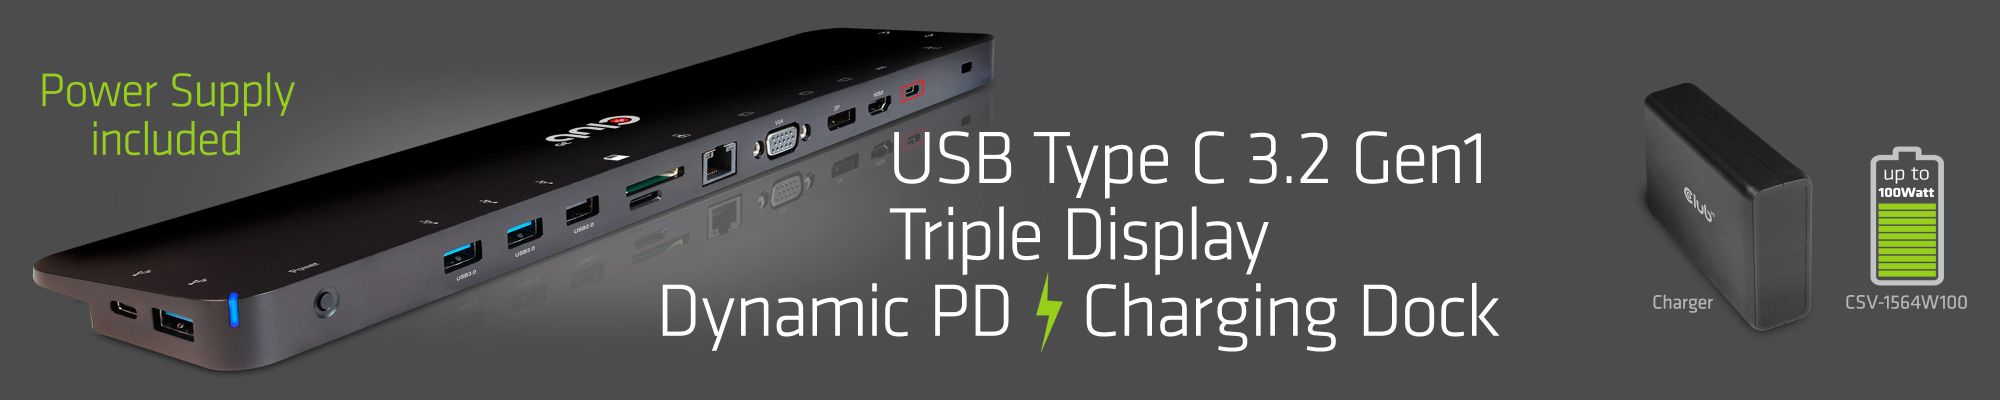 USB Type C 3.2 Gen1 Triple Display Dynamic PD Charging Dock 100W PD Power charger